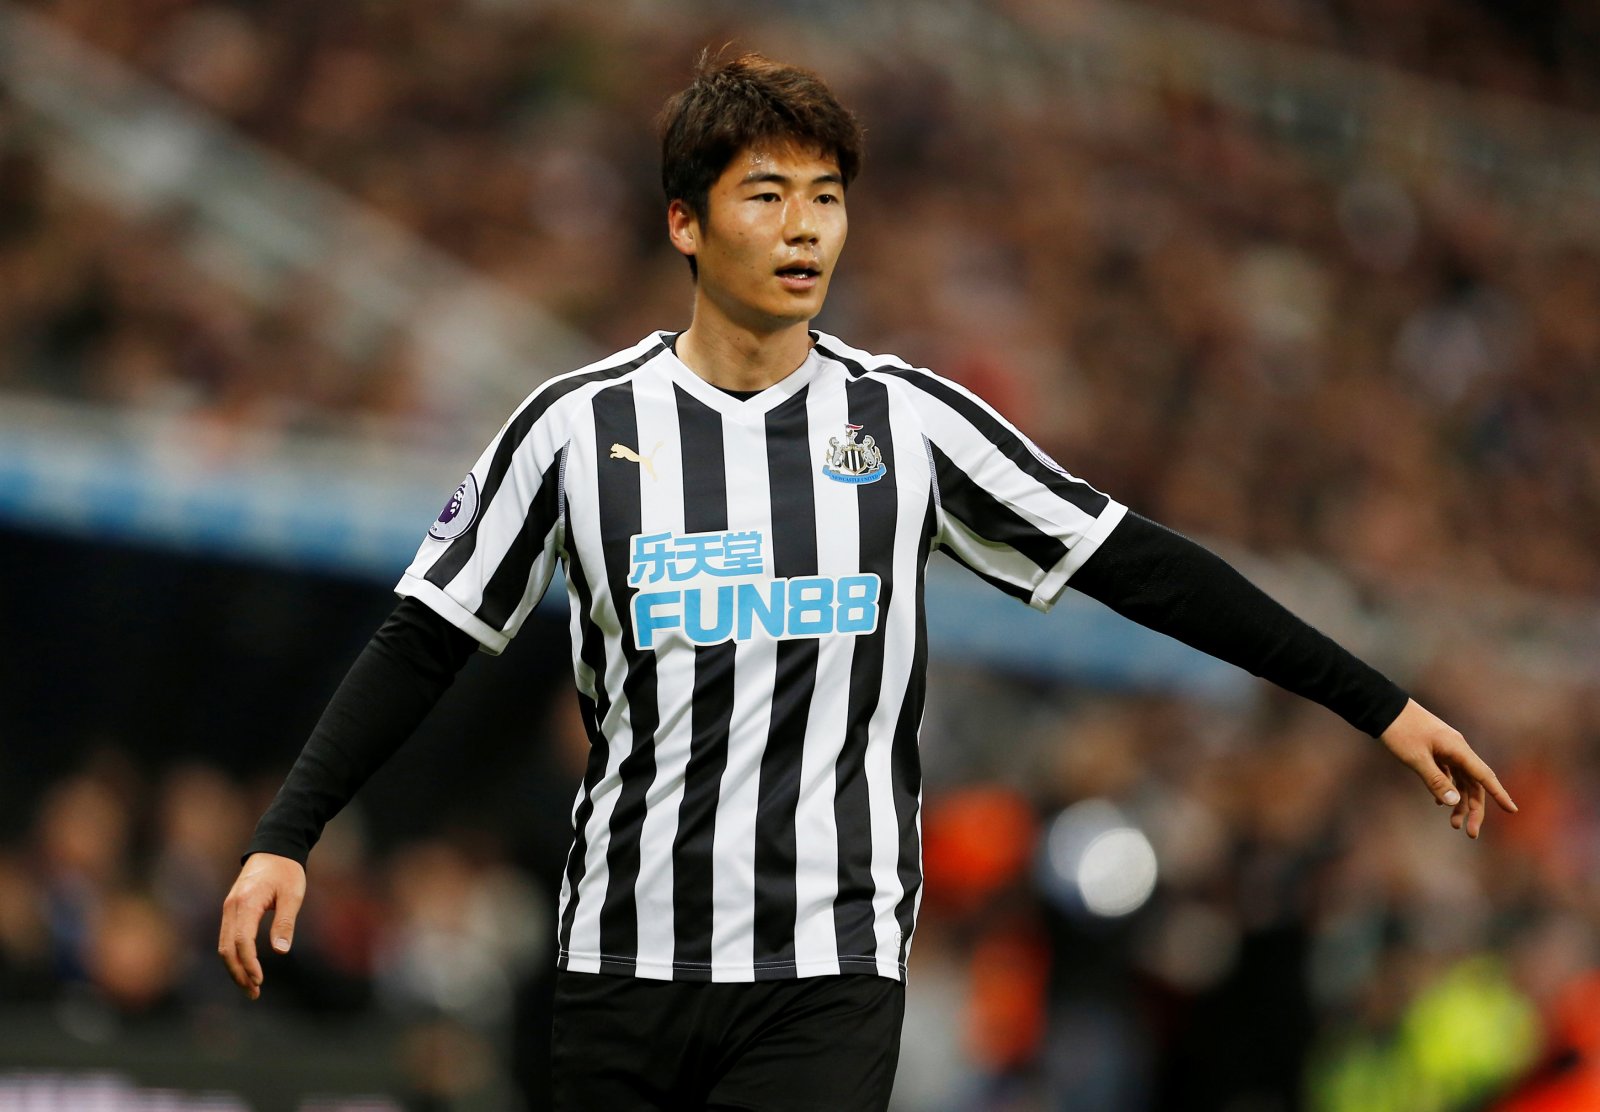 Newcastle United midfielder Ki Sung-Yeung in action. (Getty Images)